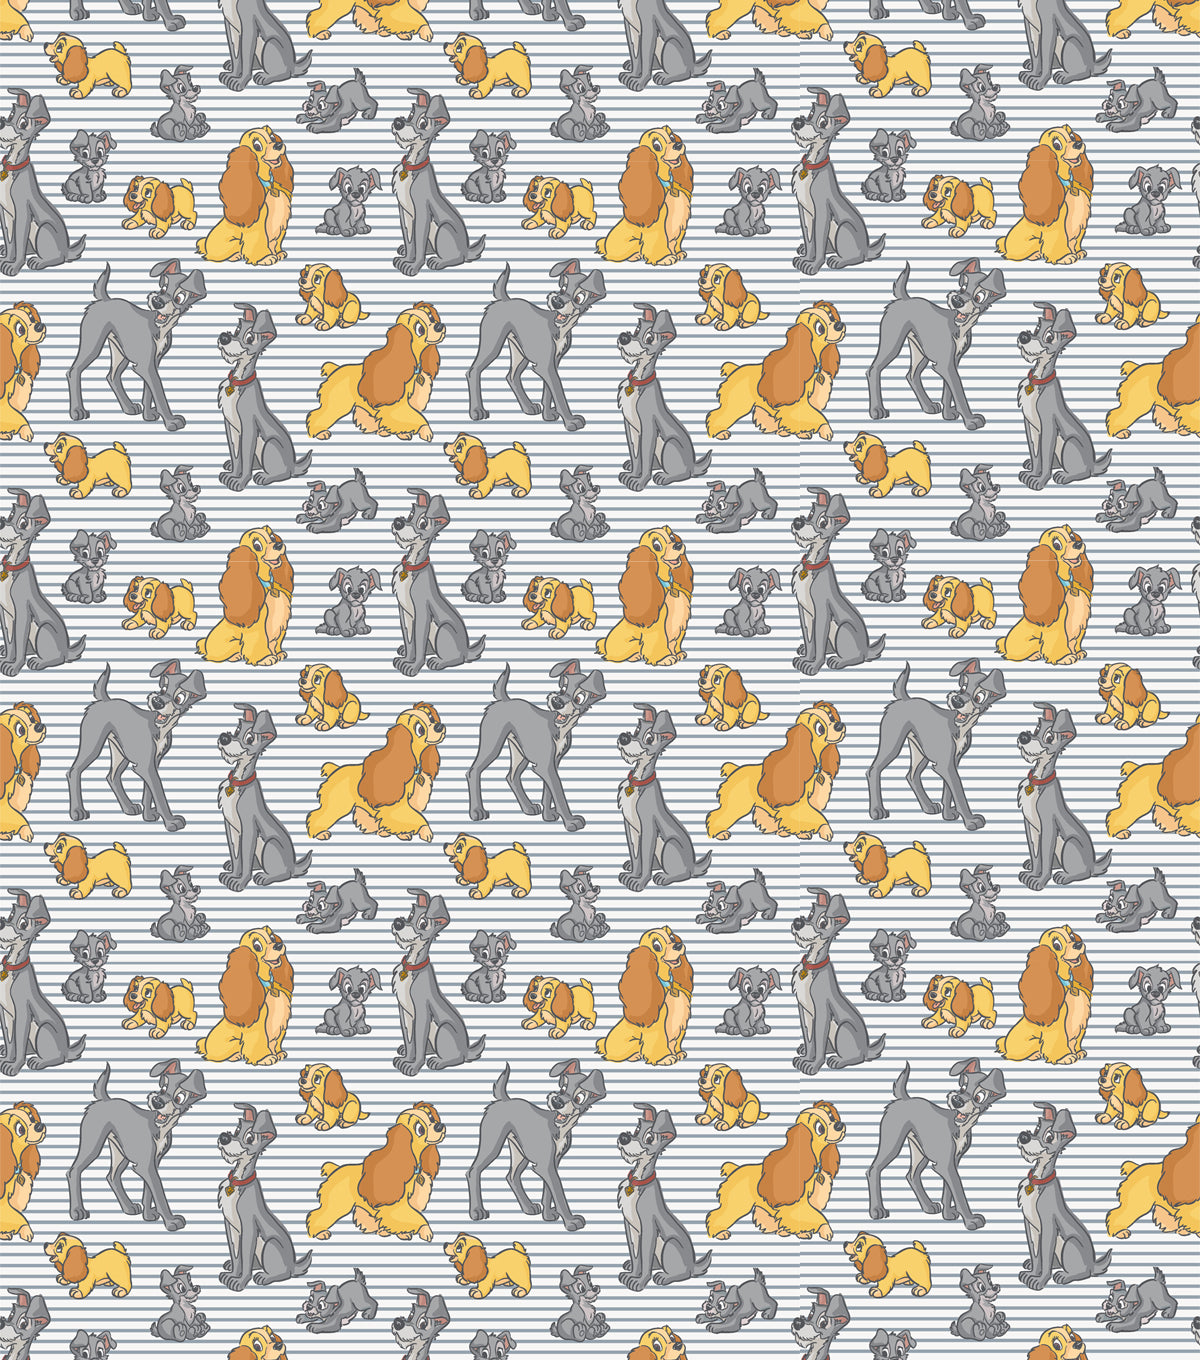 Disney Lady and the Tramp Cotton Fabric